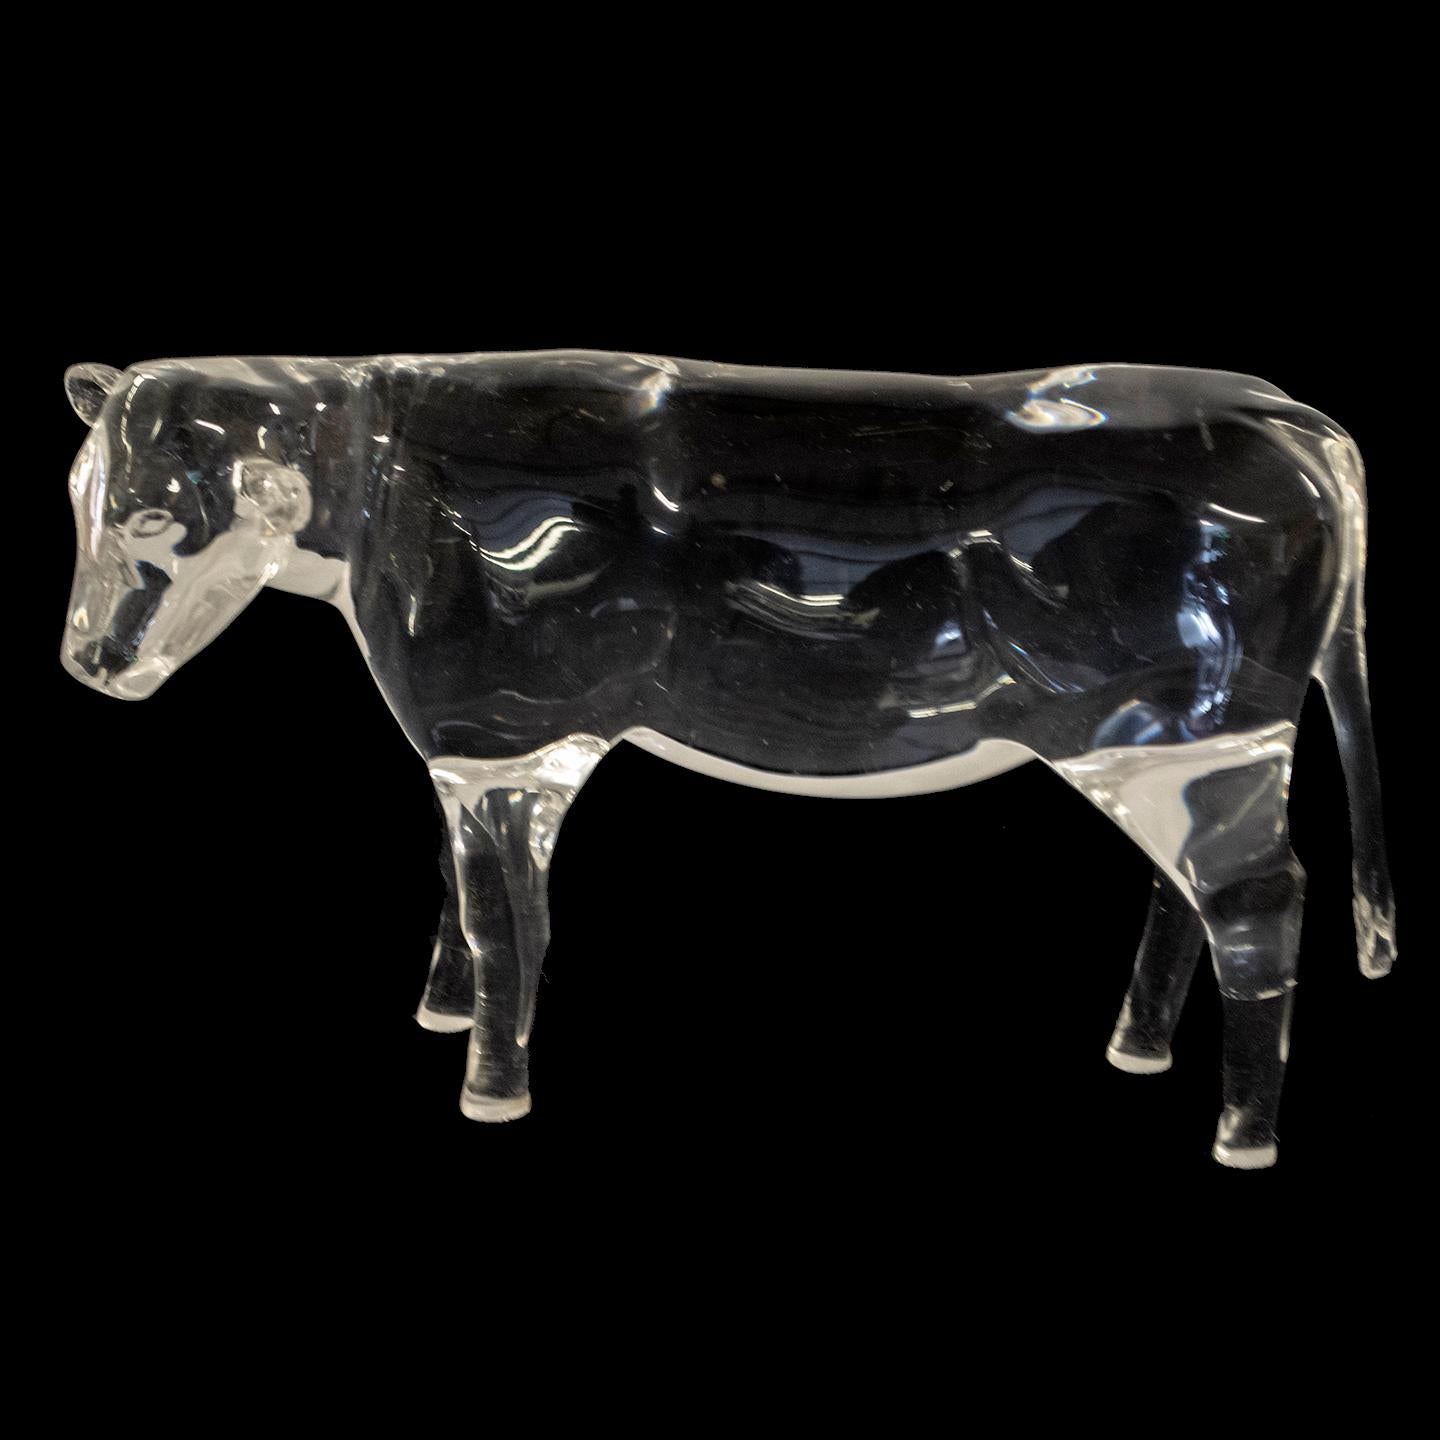 This set of hand-carved and polished acrylic cows was created by artist Mark Yurkiw for brochure photography. As such, they are only 75% three-dimensional, with a flat rear surface. Today, these decorative figurines would add a sense of charm